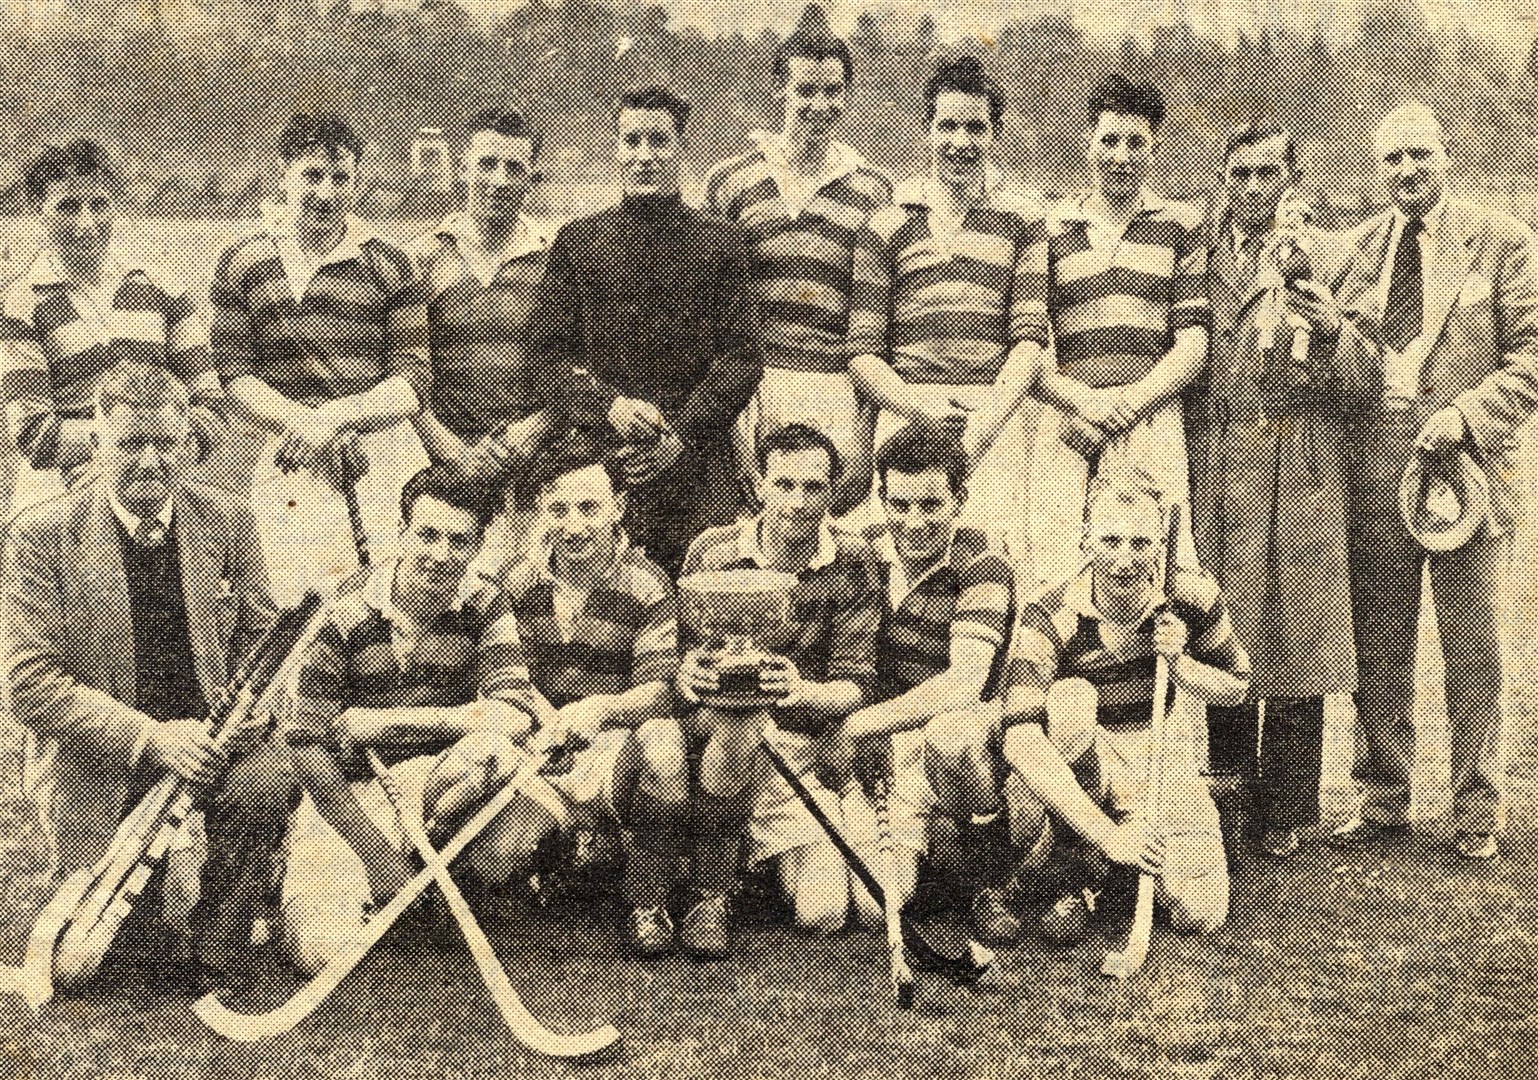 No stranger to success: Ian was a member of several teams who lifted trophies in the 1950s.